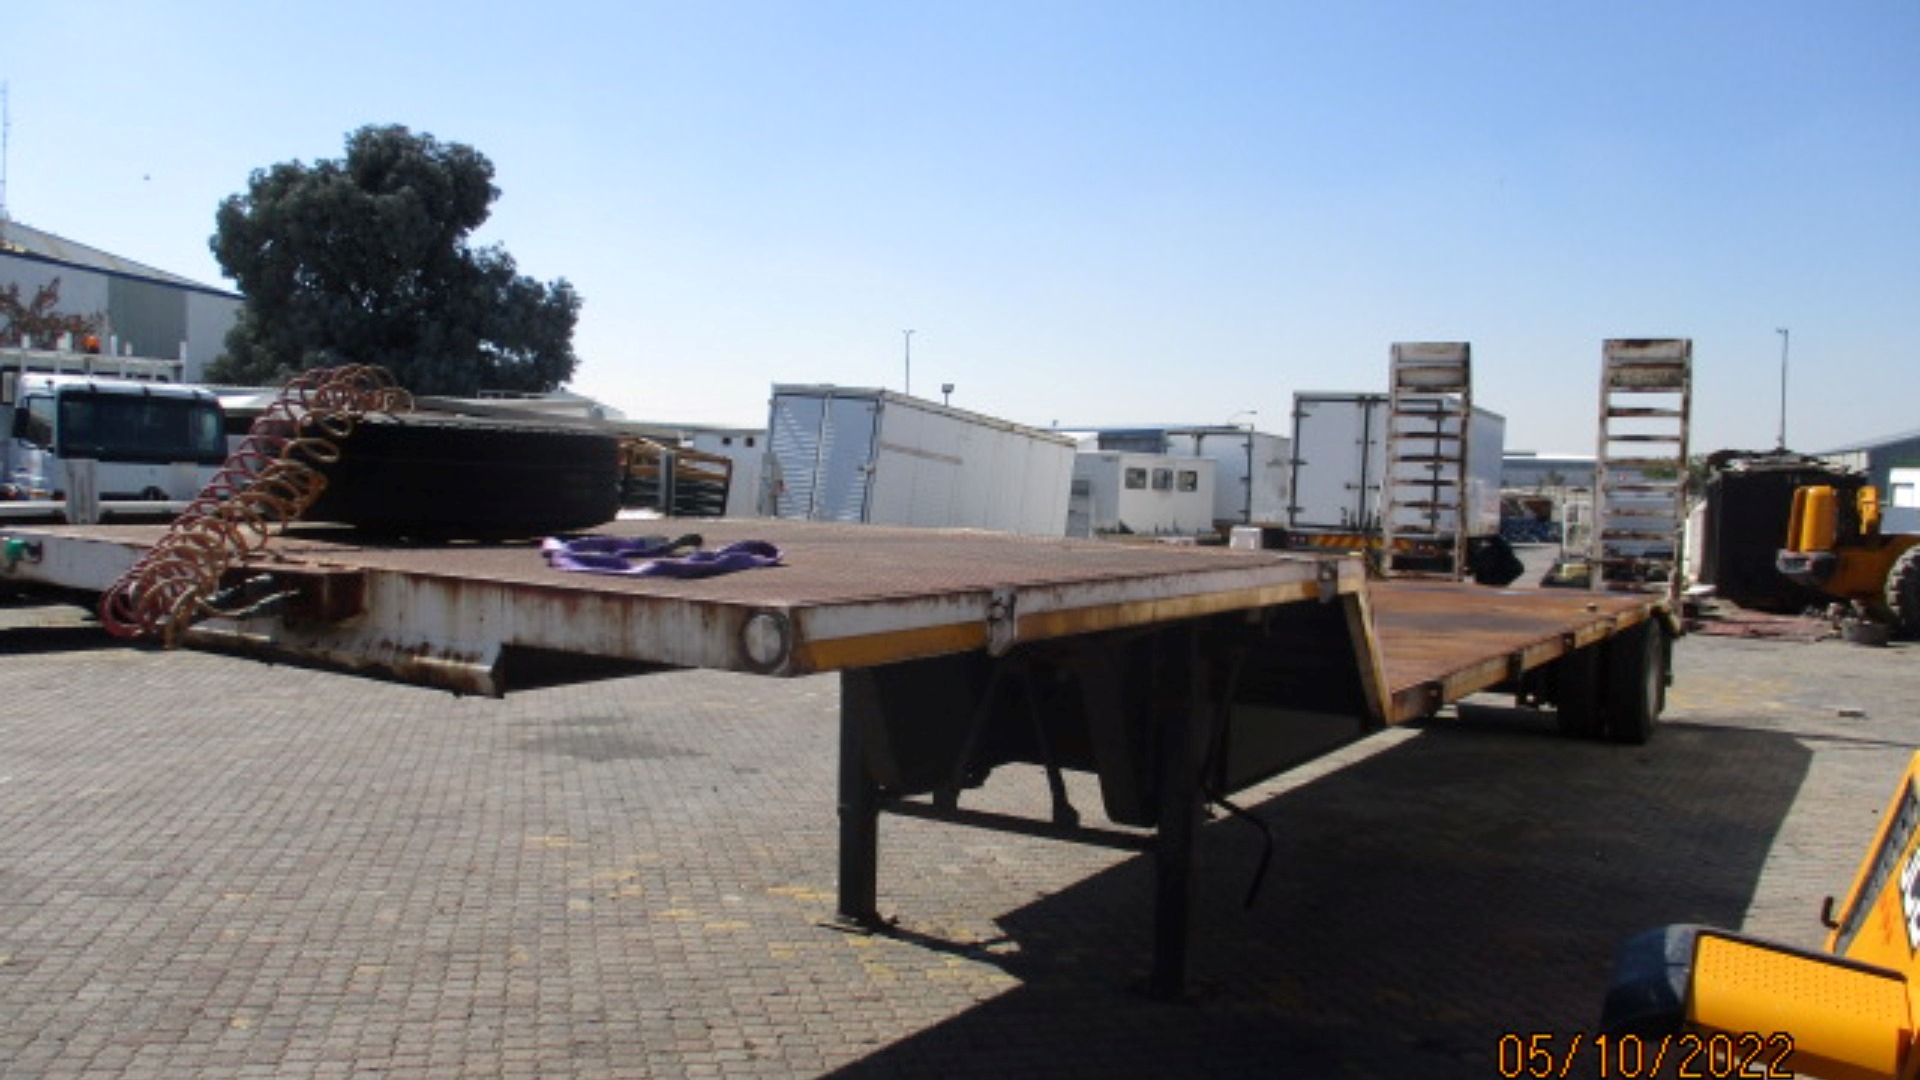 Paramount Trailers 12.5 METER SINGLE AXLE LOW BED TRAILER 2013 for sale by Isando Truck and Trailer | Truck & Trailer Marketplaces